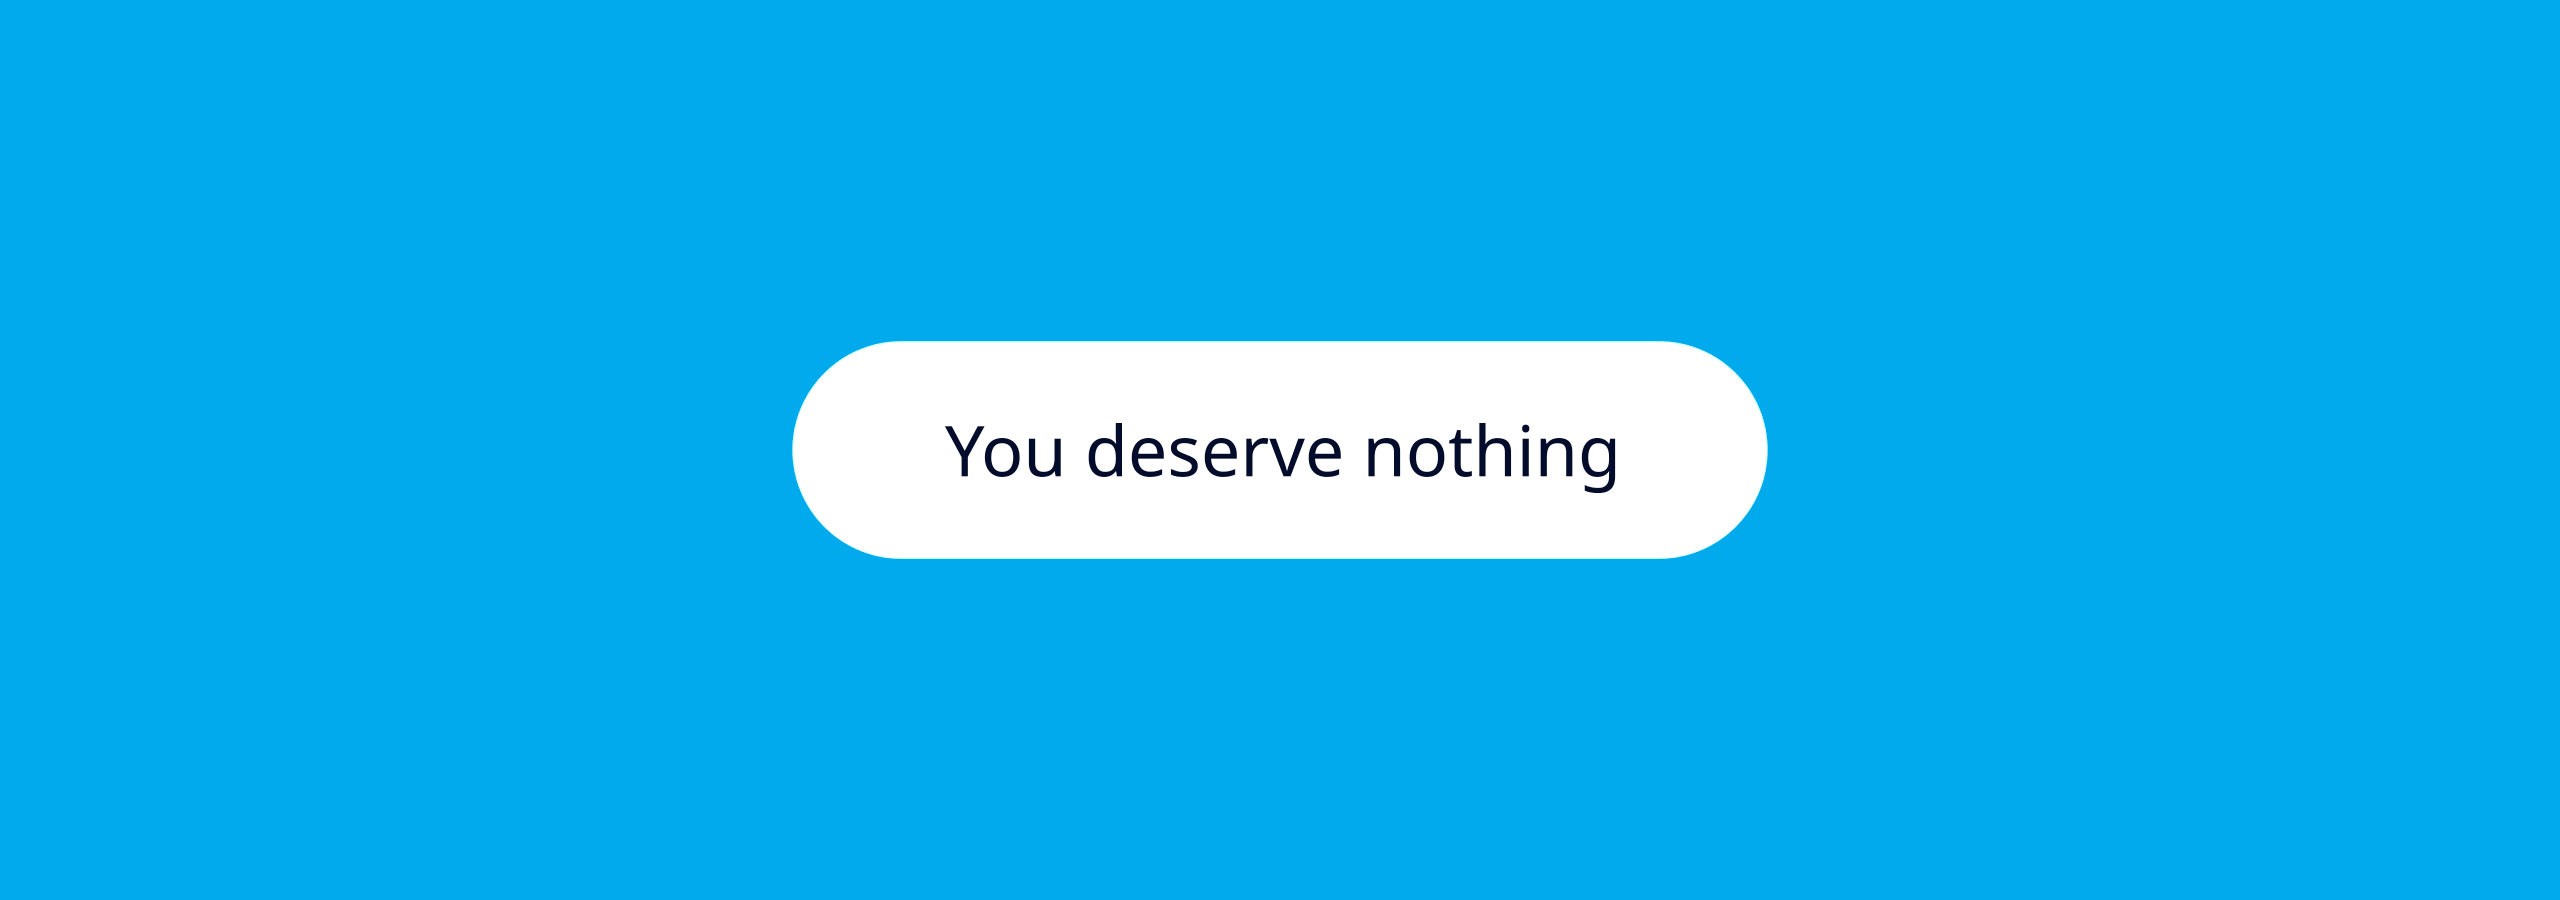 You deserve nothing but the best